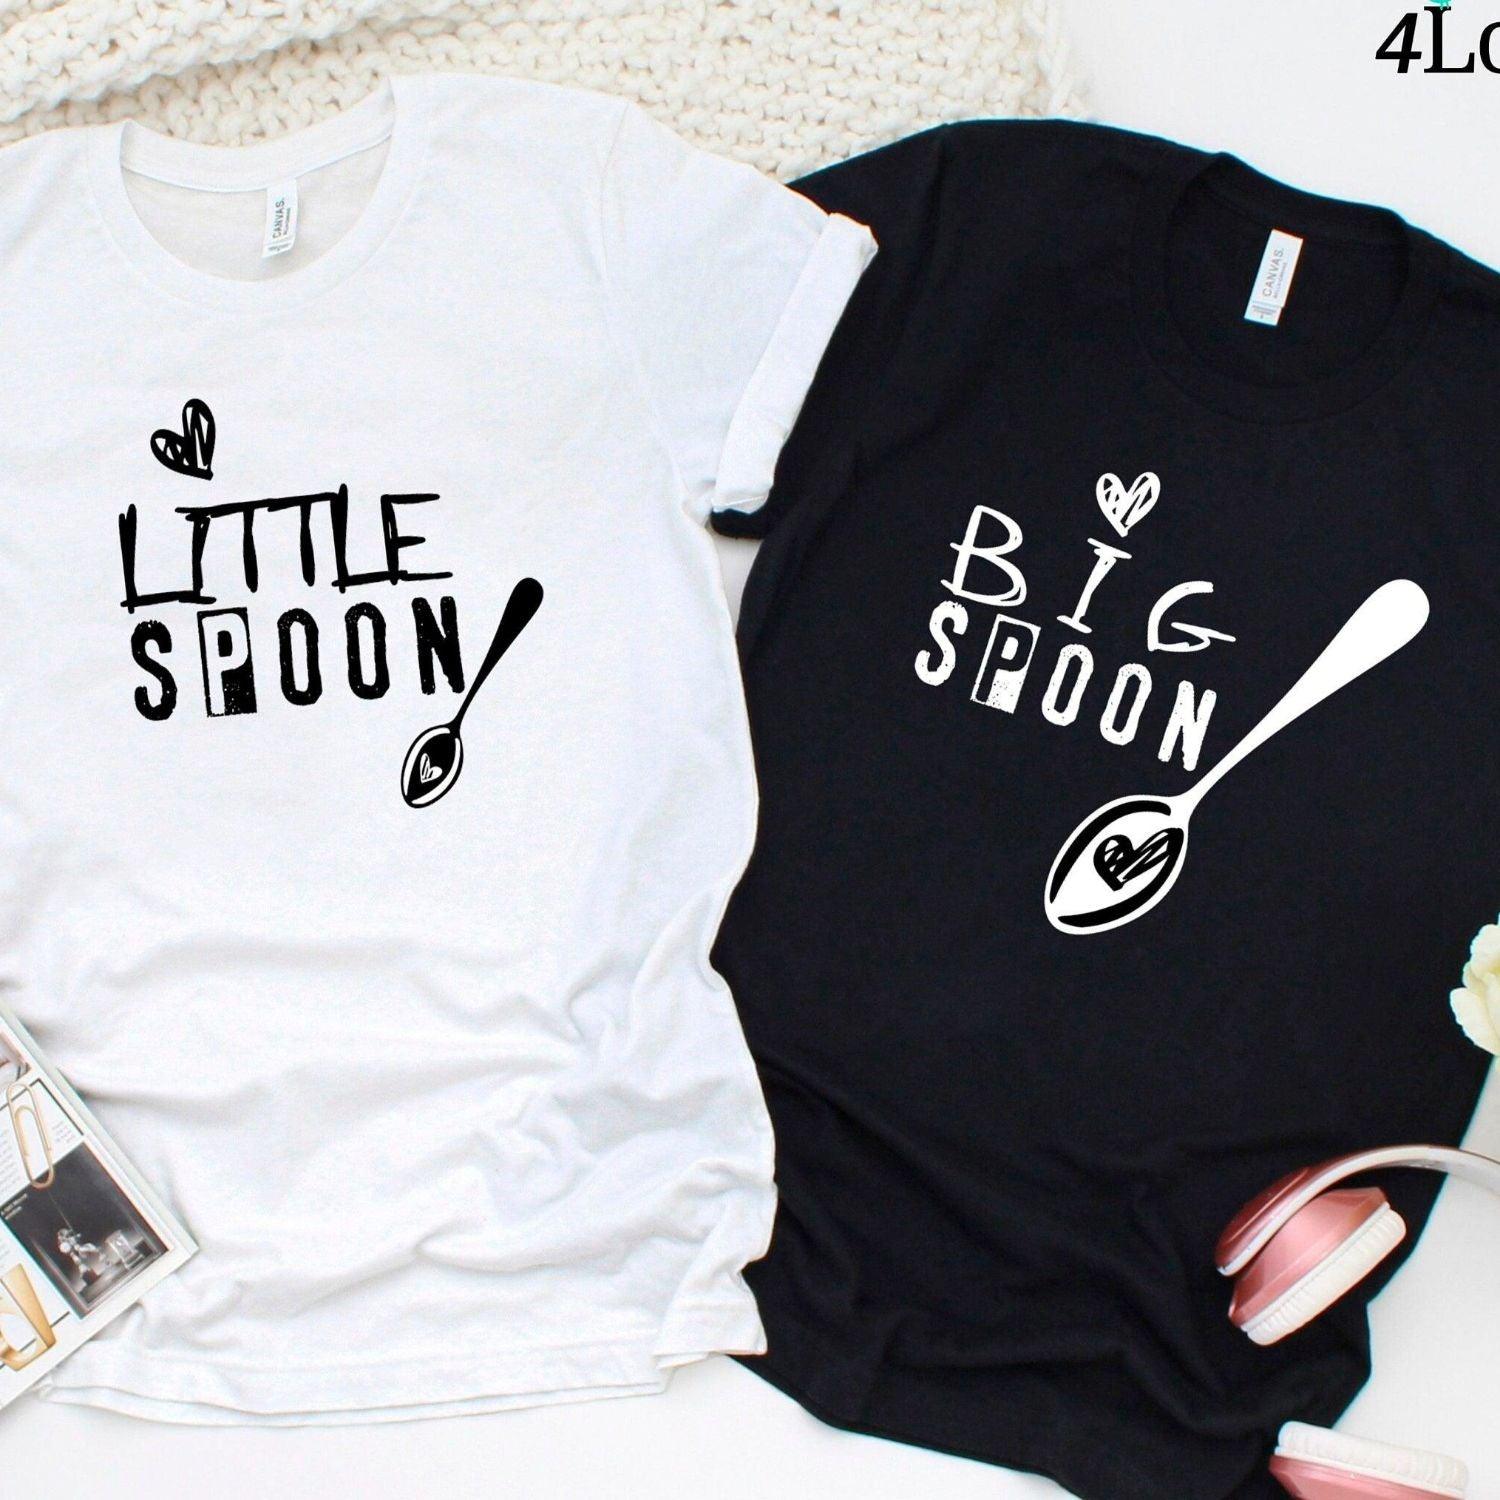 Big Spoon Little Spoon Matching Set - Valentines Gift For Couples, His And Hers Apparel, Newlywed Tees - 4Lovebirds